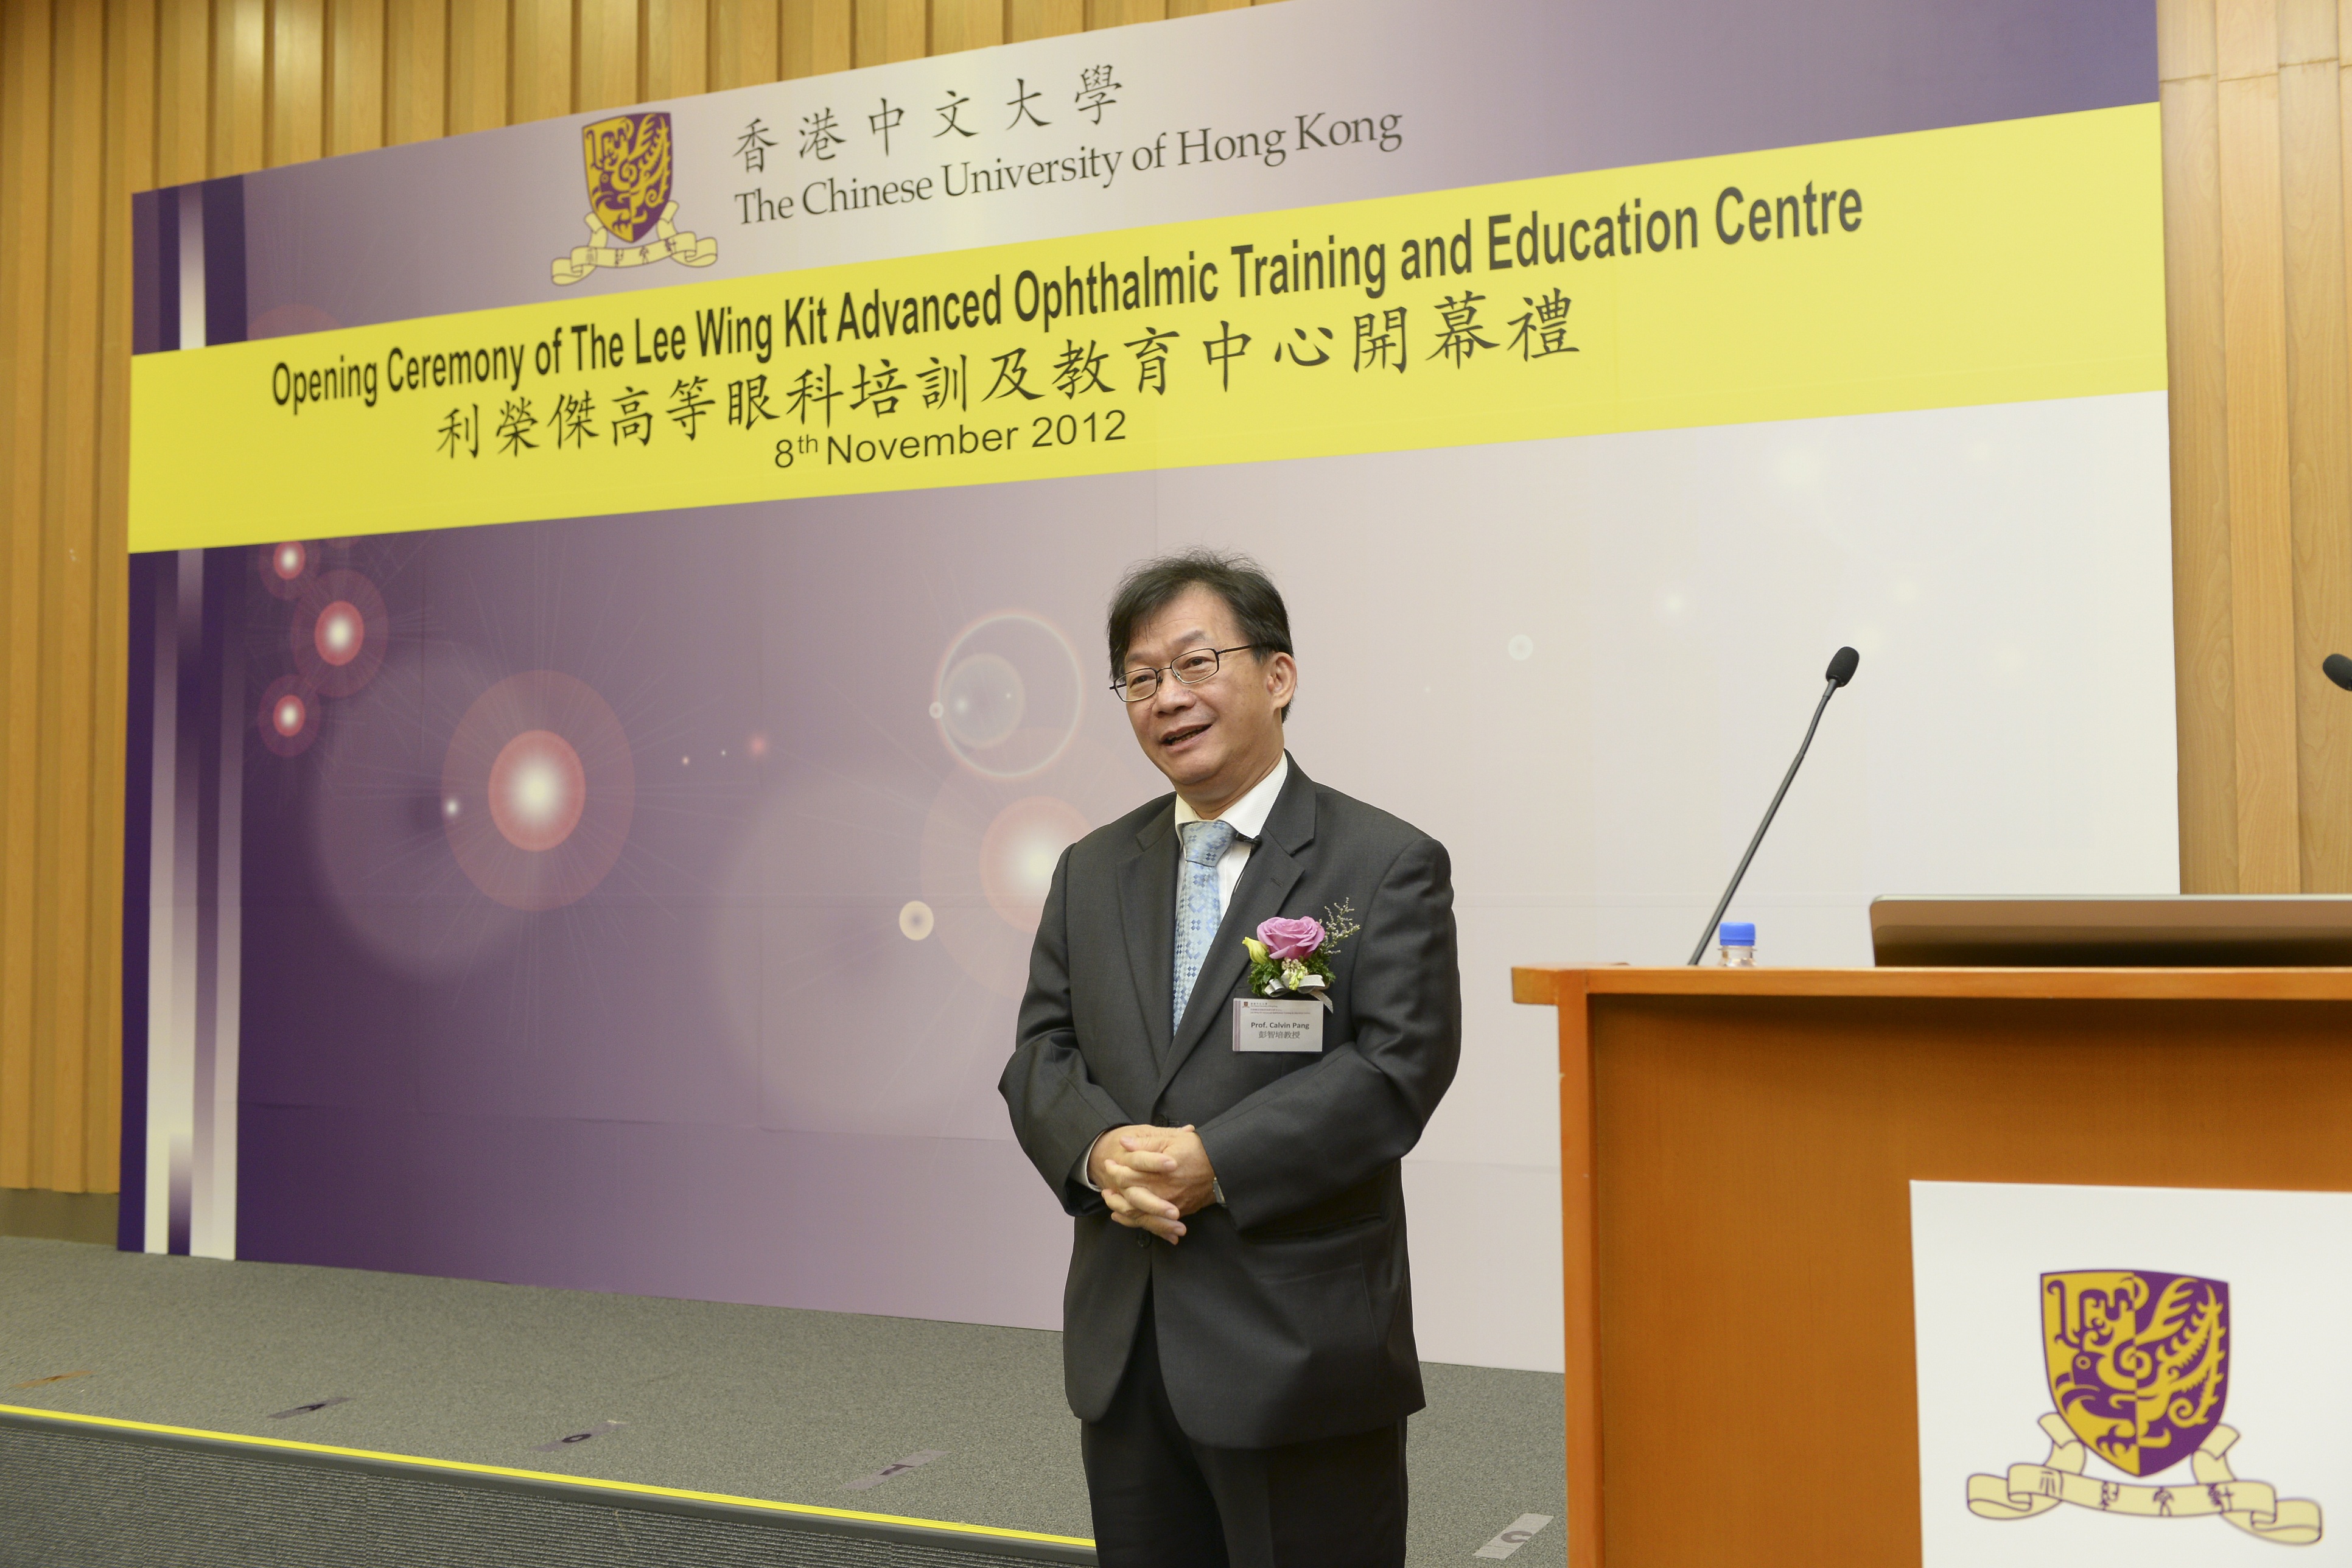 Speech by Professor Calvin Pang, Chairman of the Department of Ophthalmology and Visual Sciences, CUHK